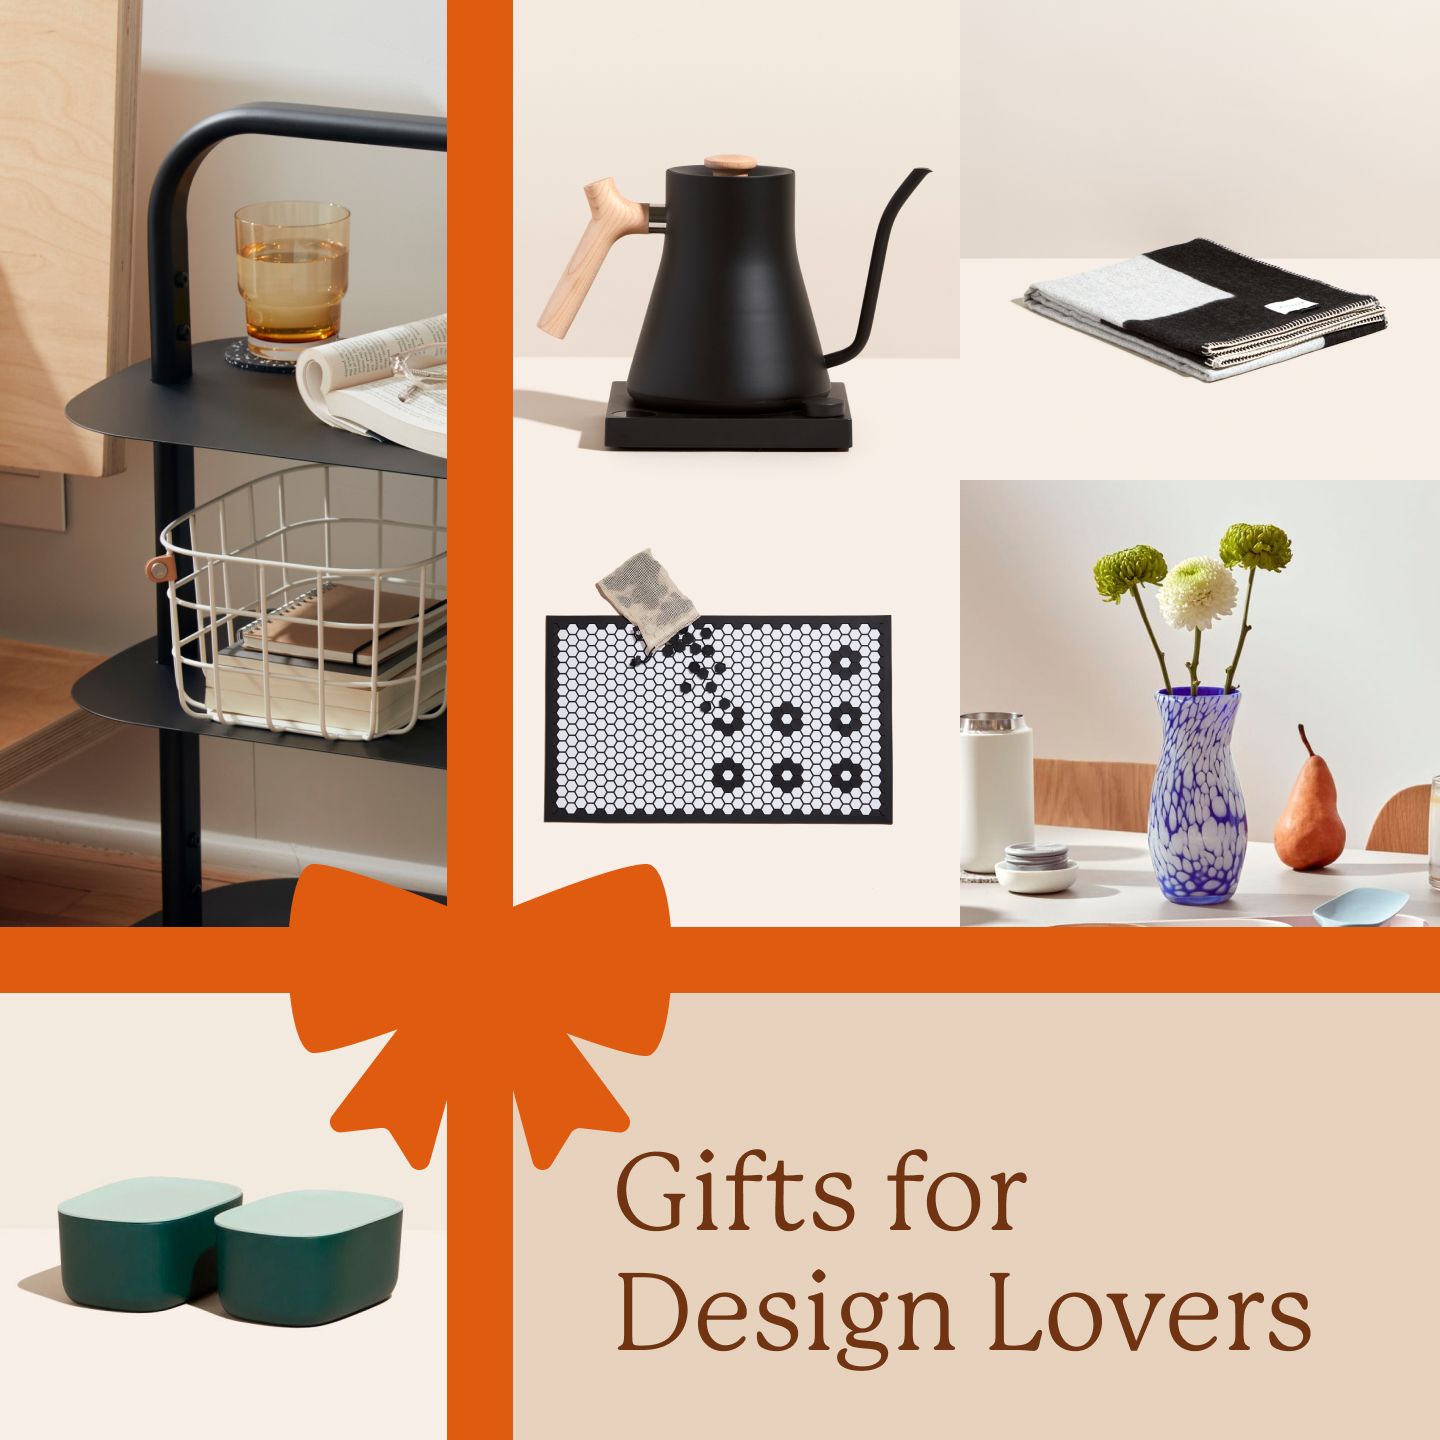 Gifts for Design Lovers